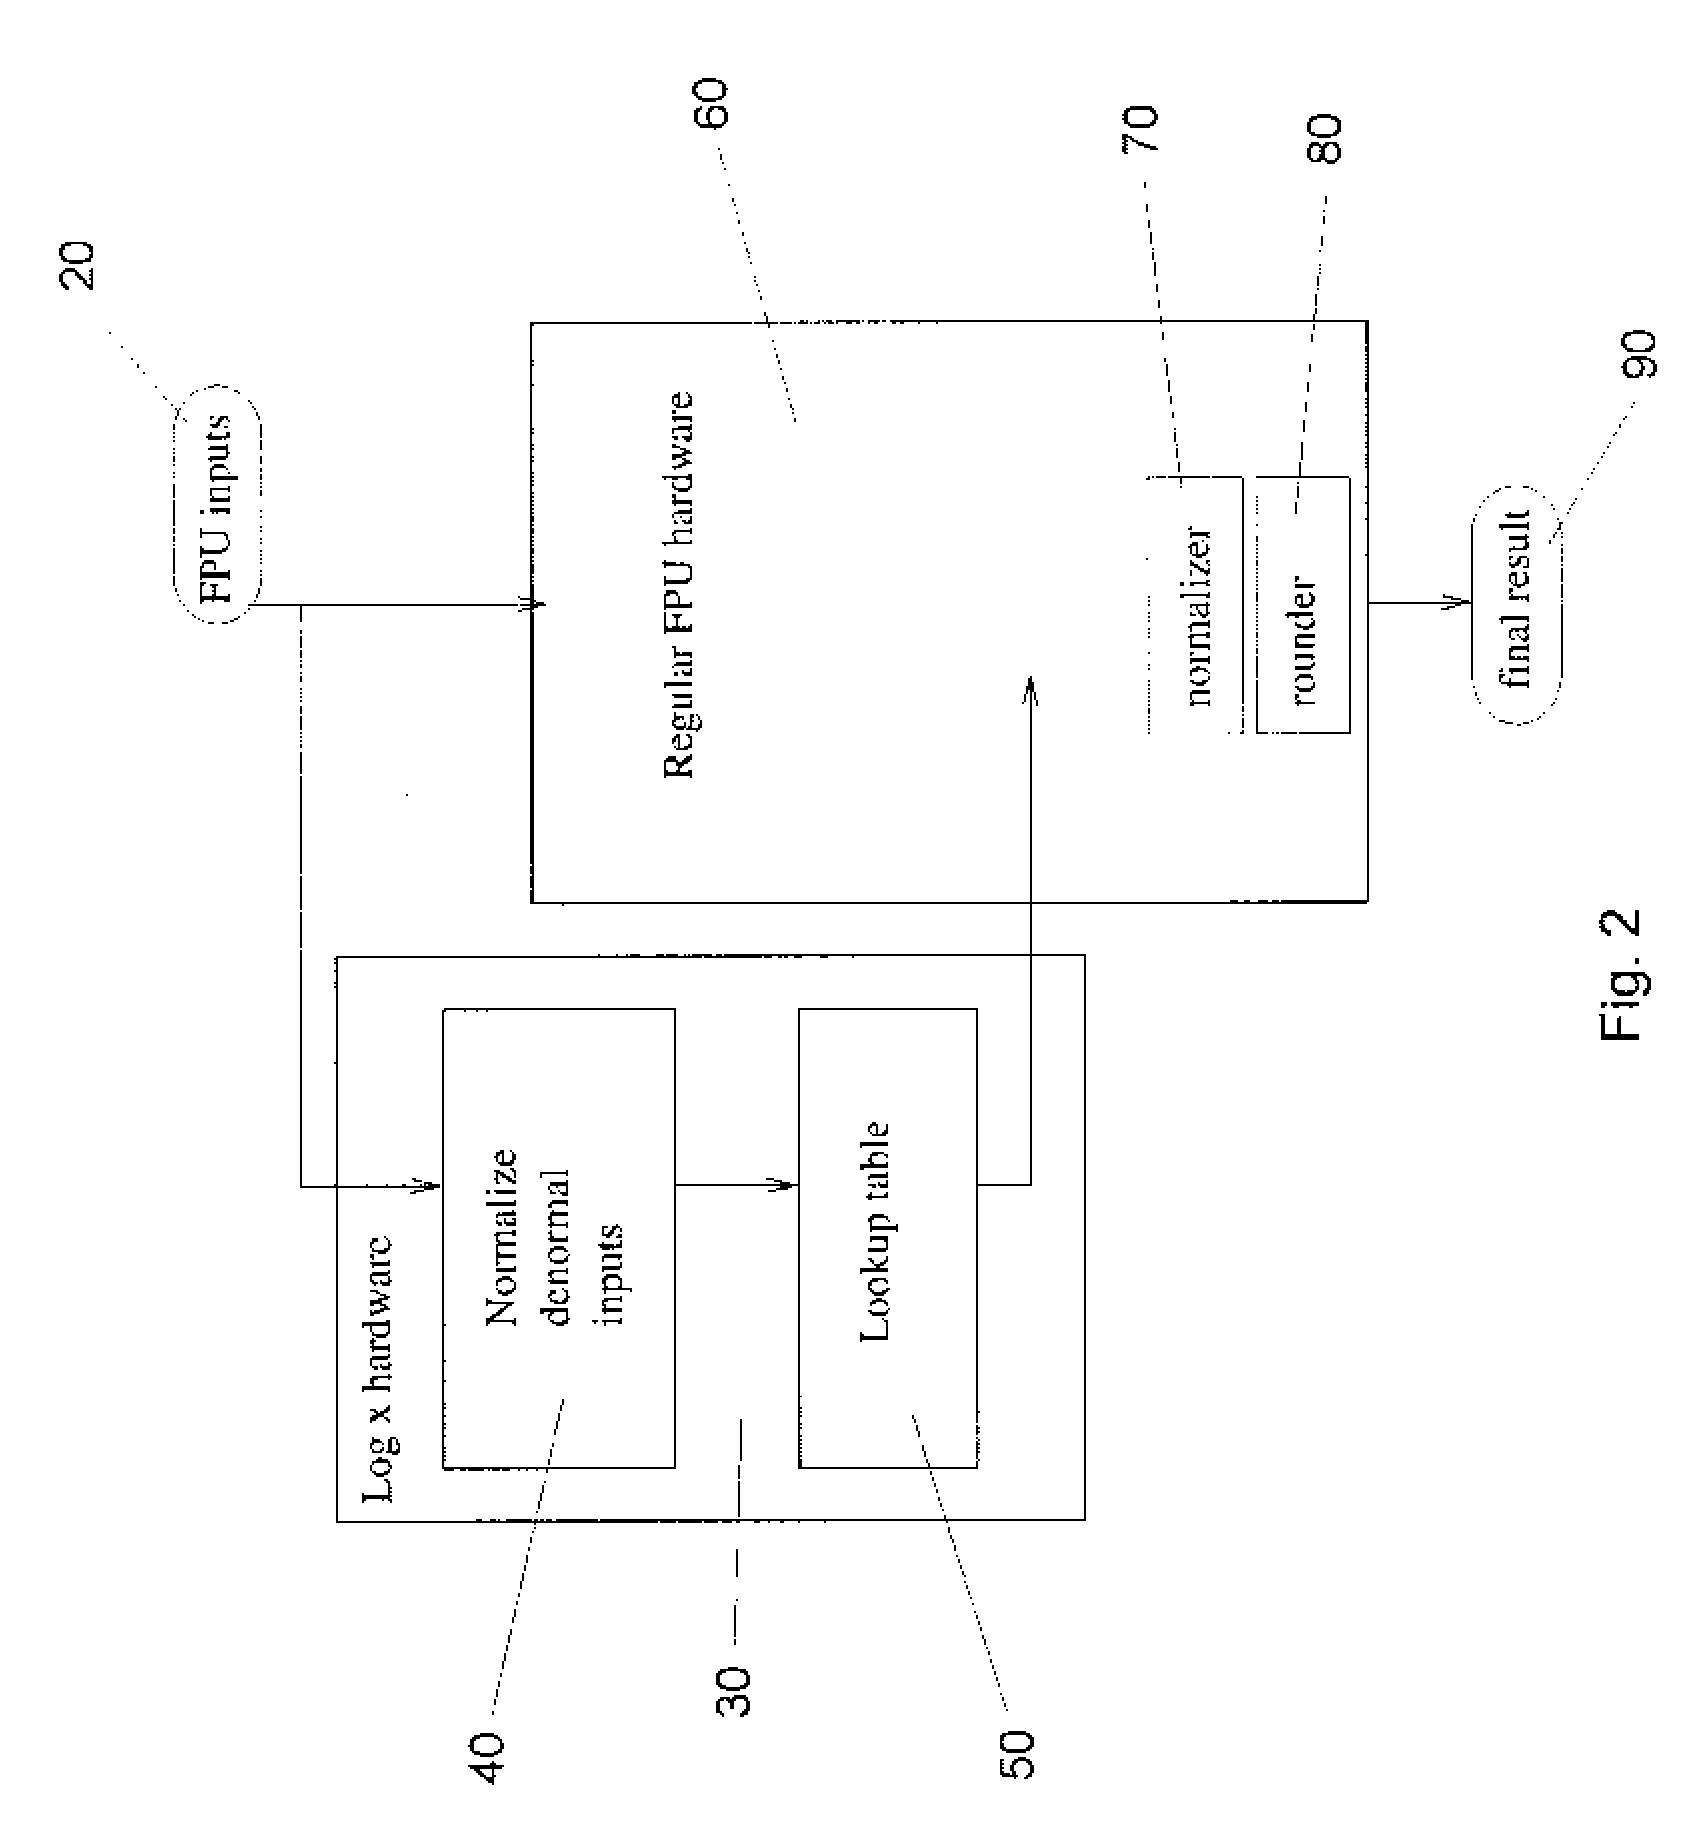 Method and Processor for Performing a Floating-Point Instruction Within a Processor